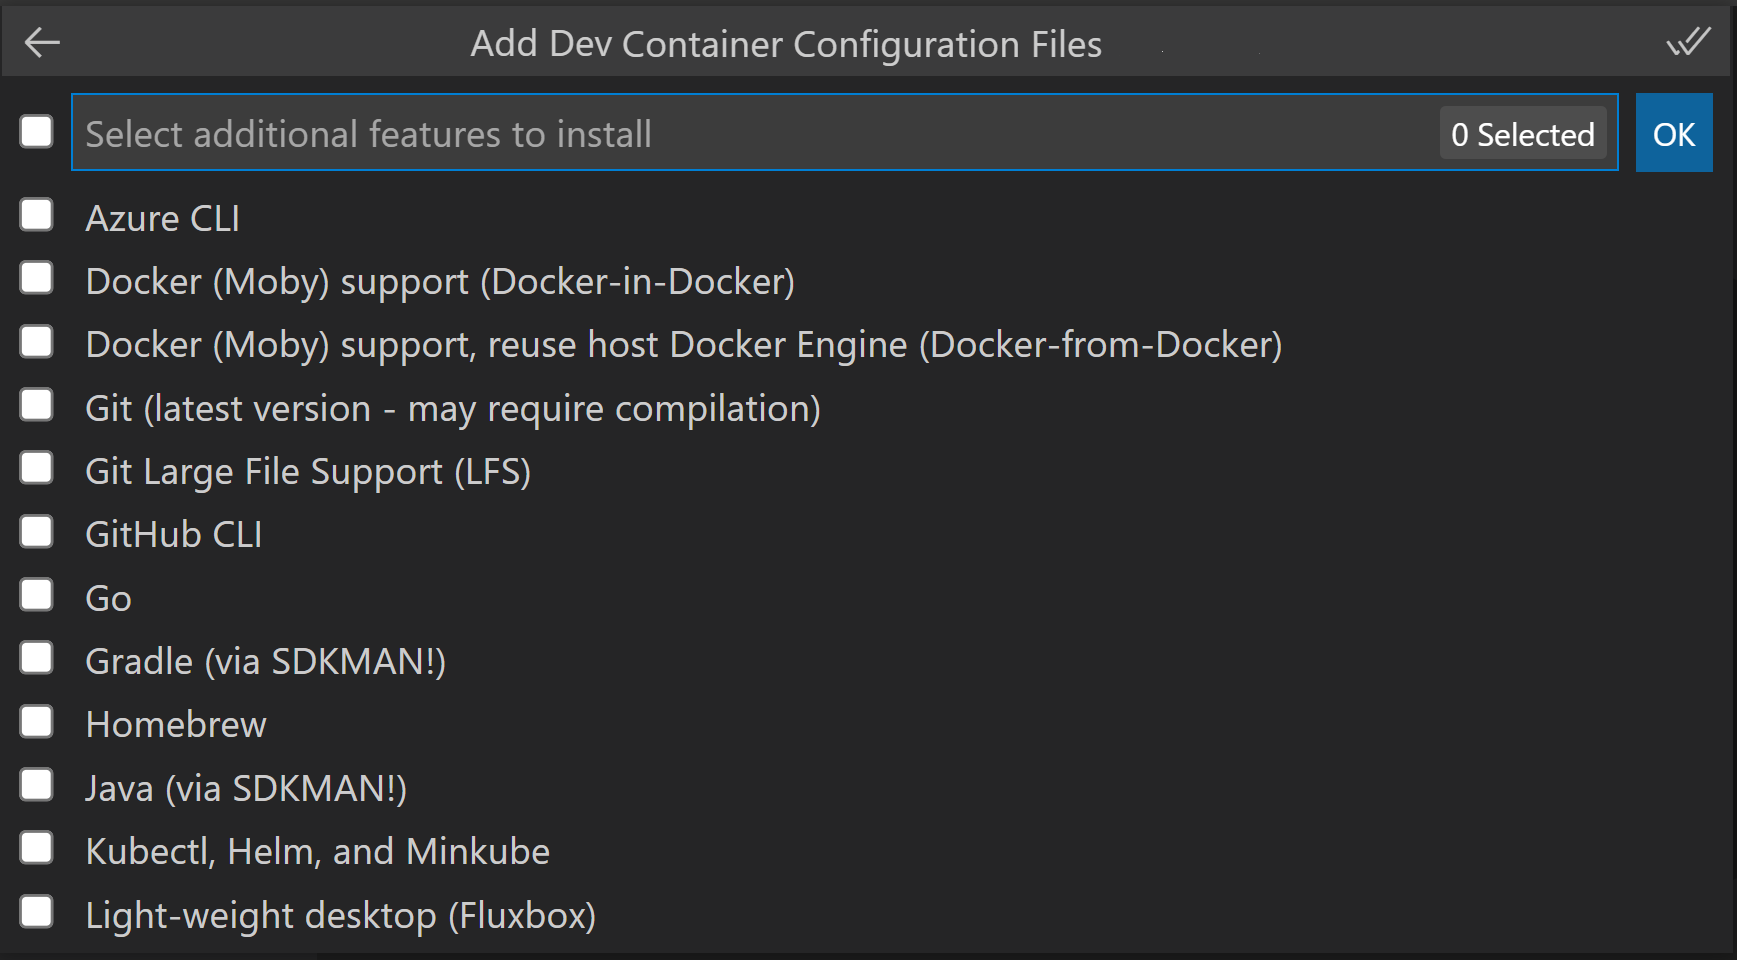 Dev container Features list drop down